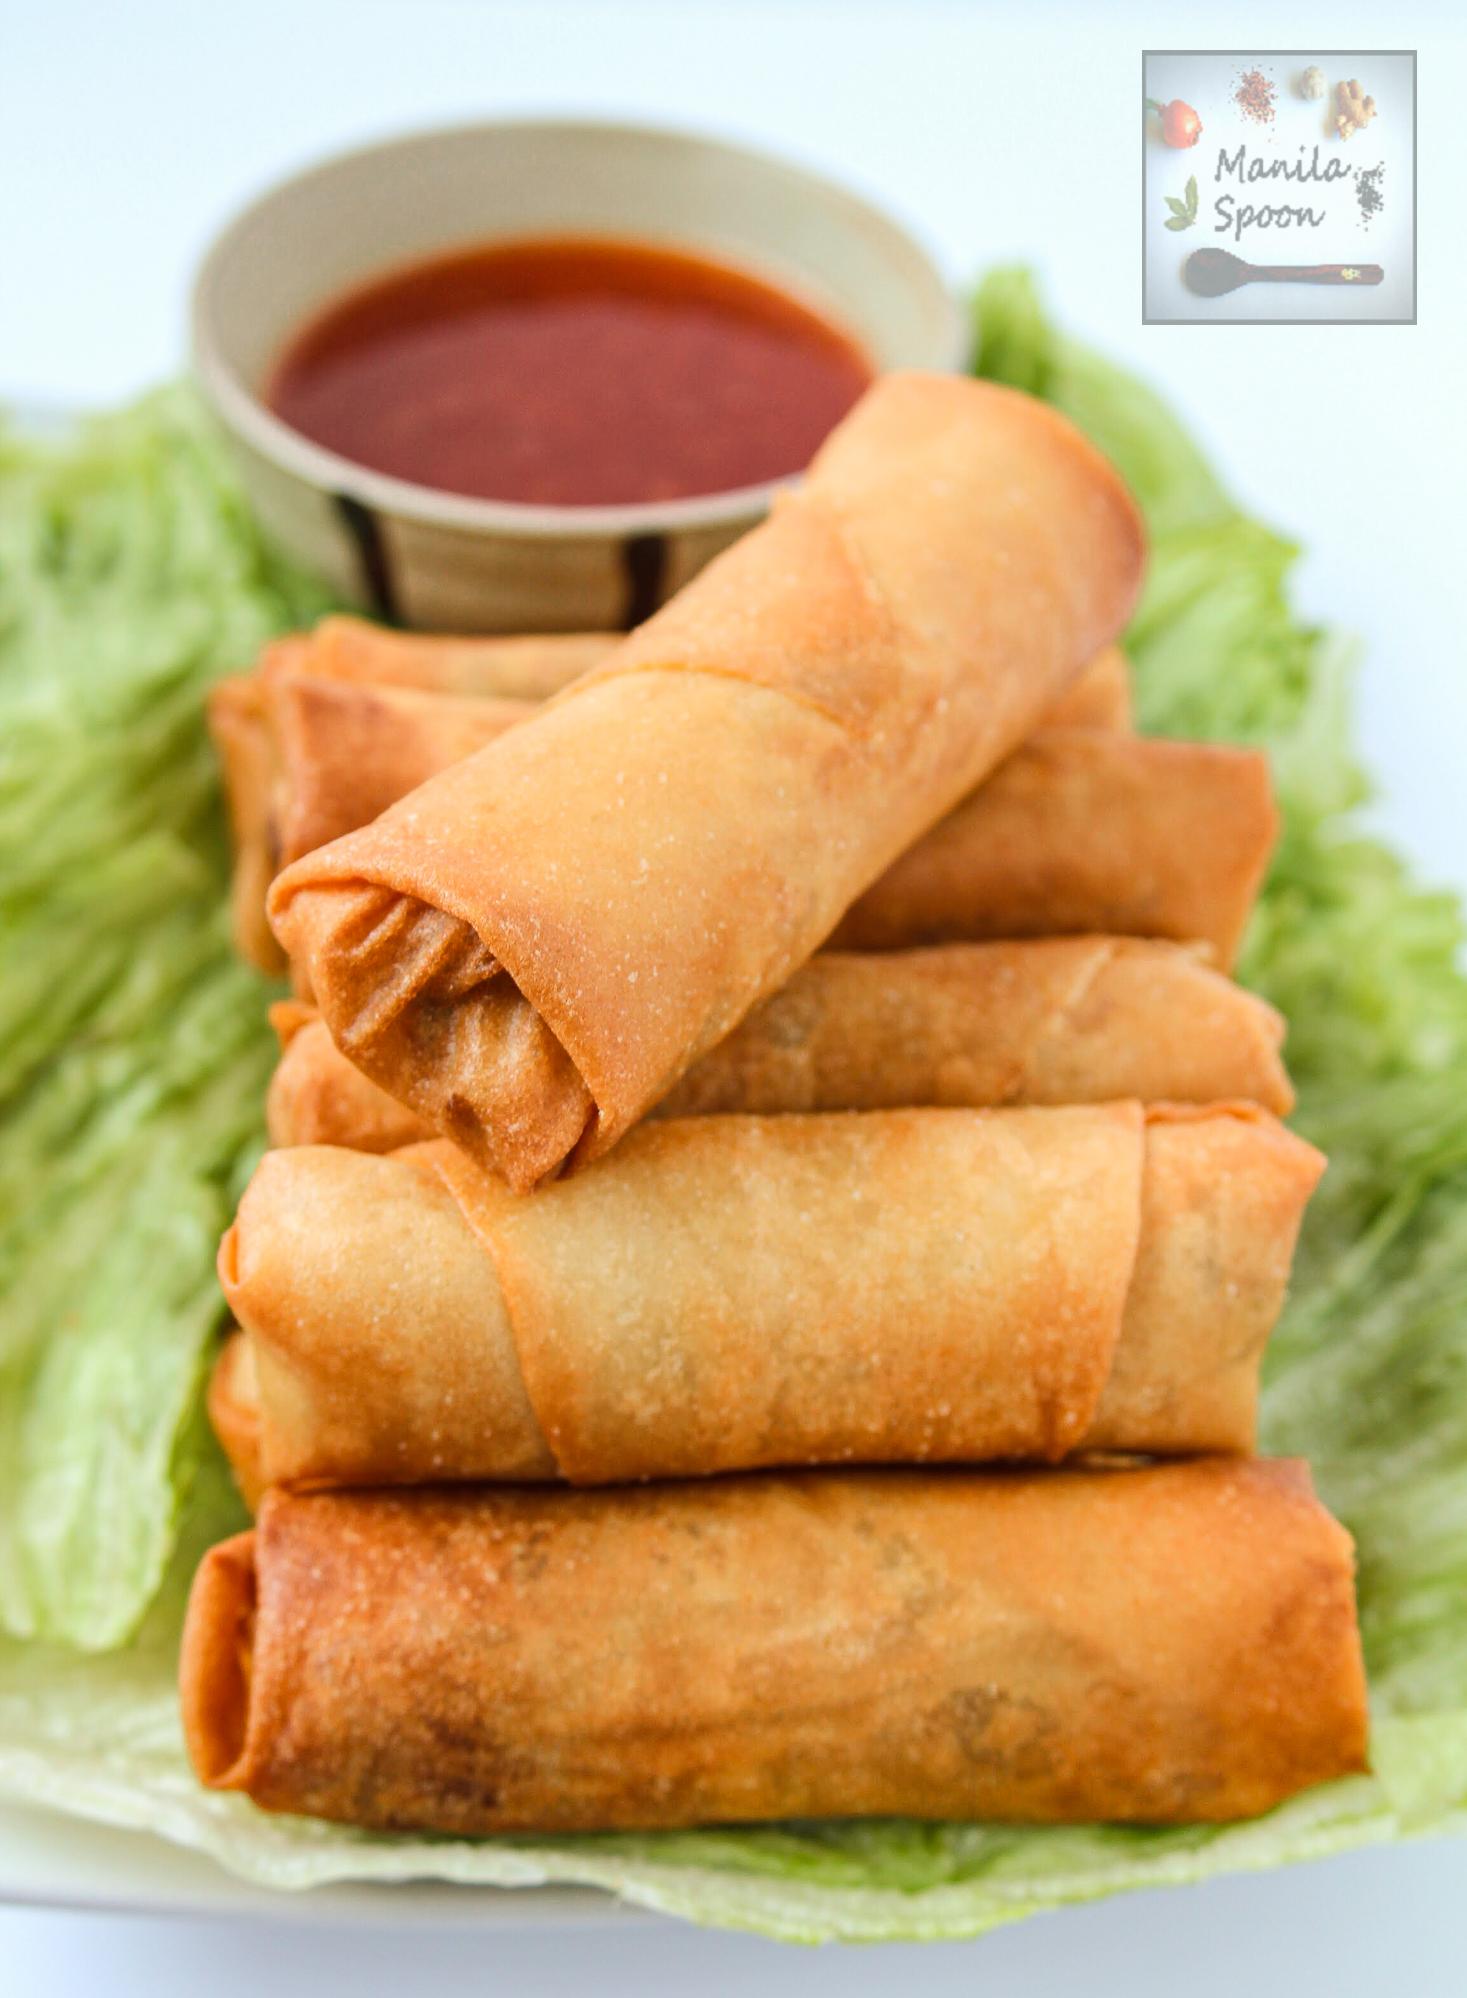 Vegetarian Lumpia from the Philippines